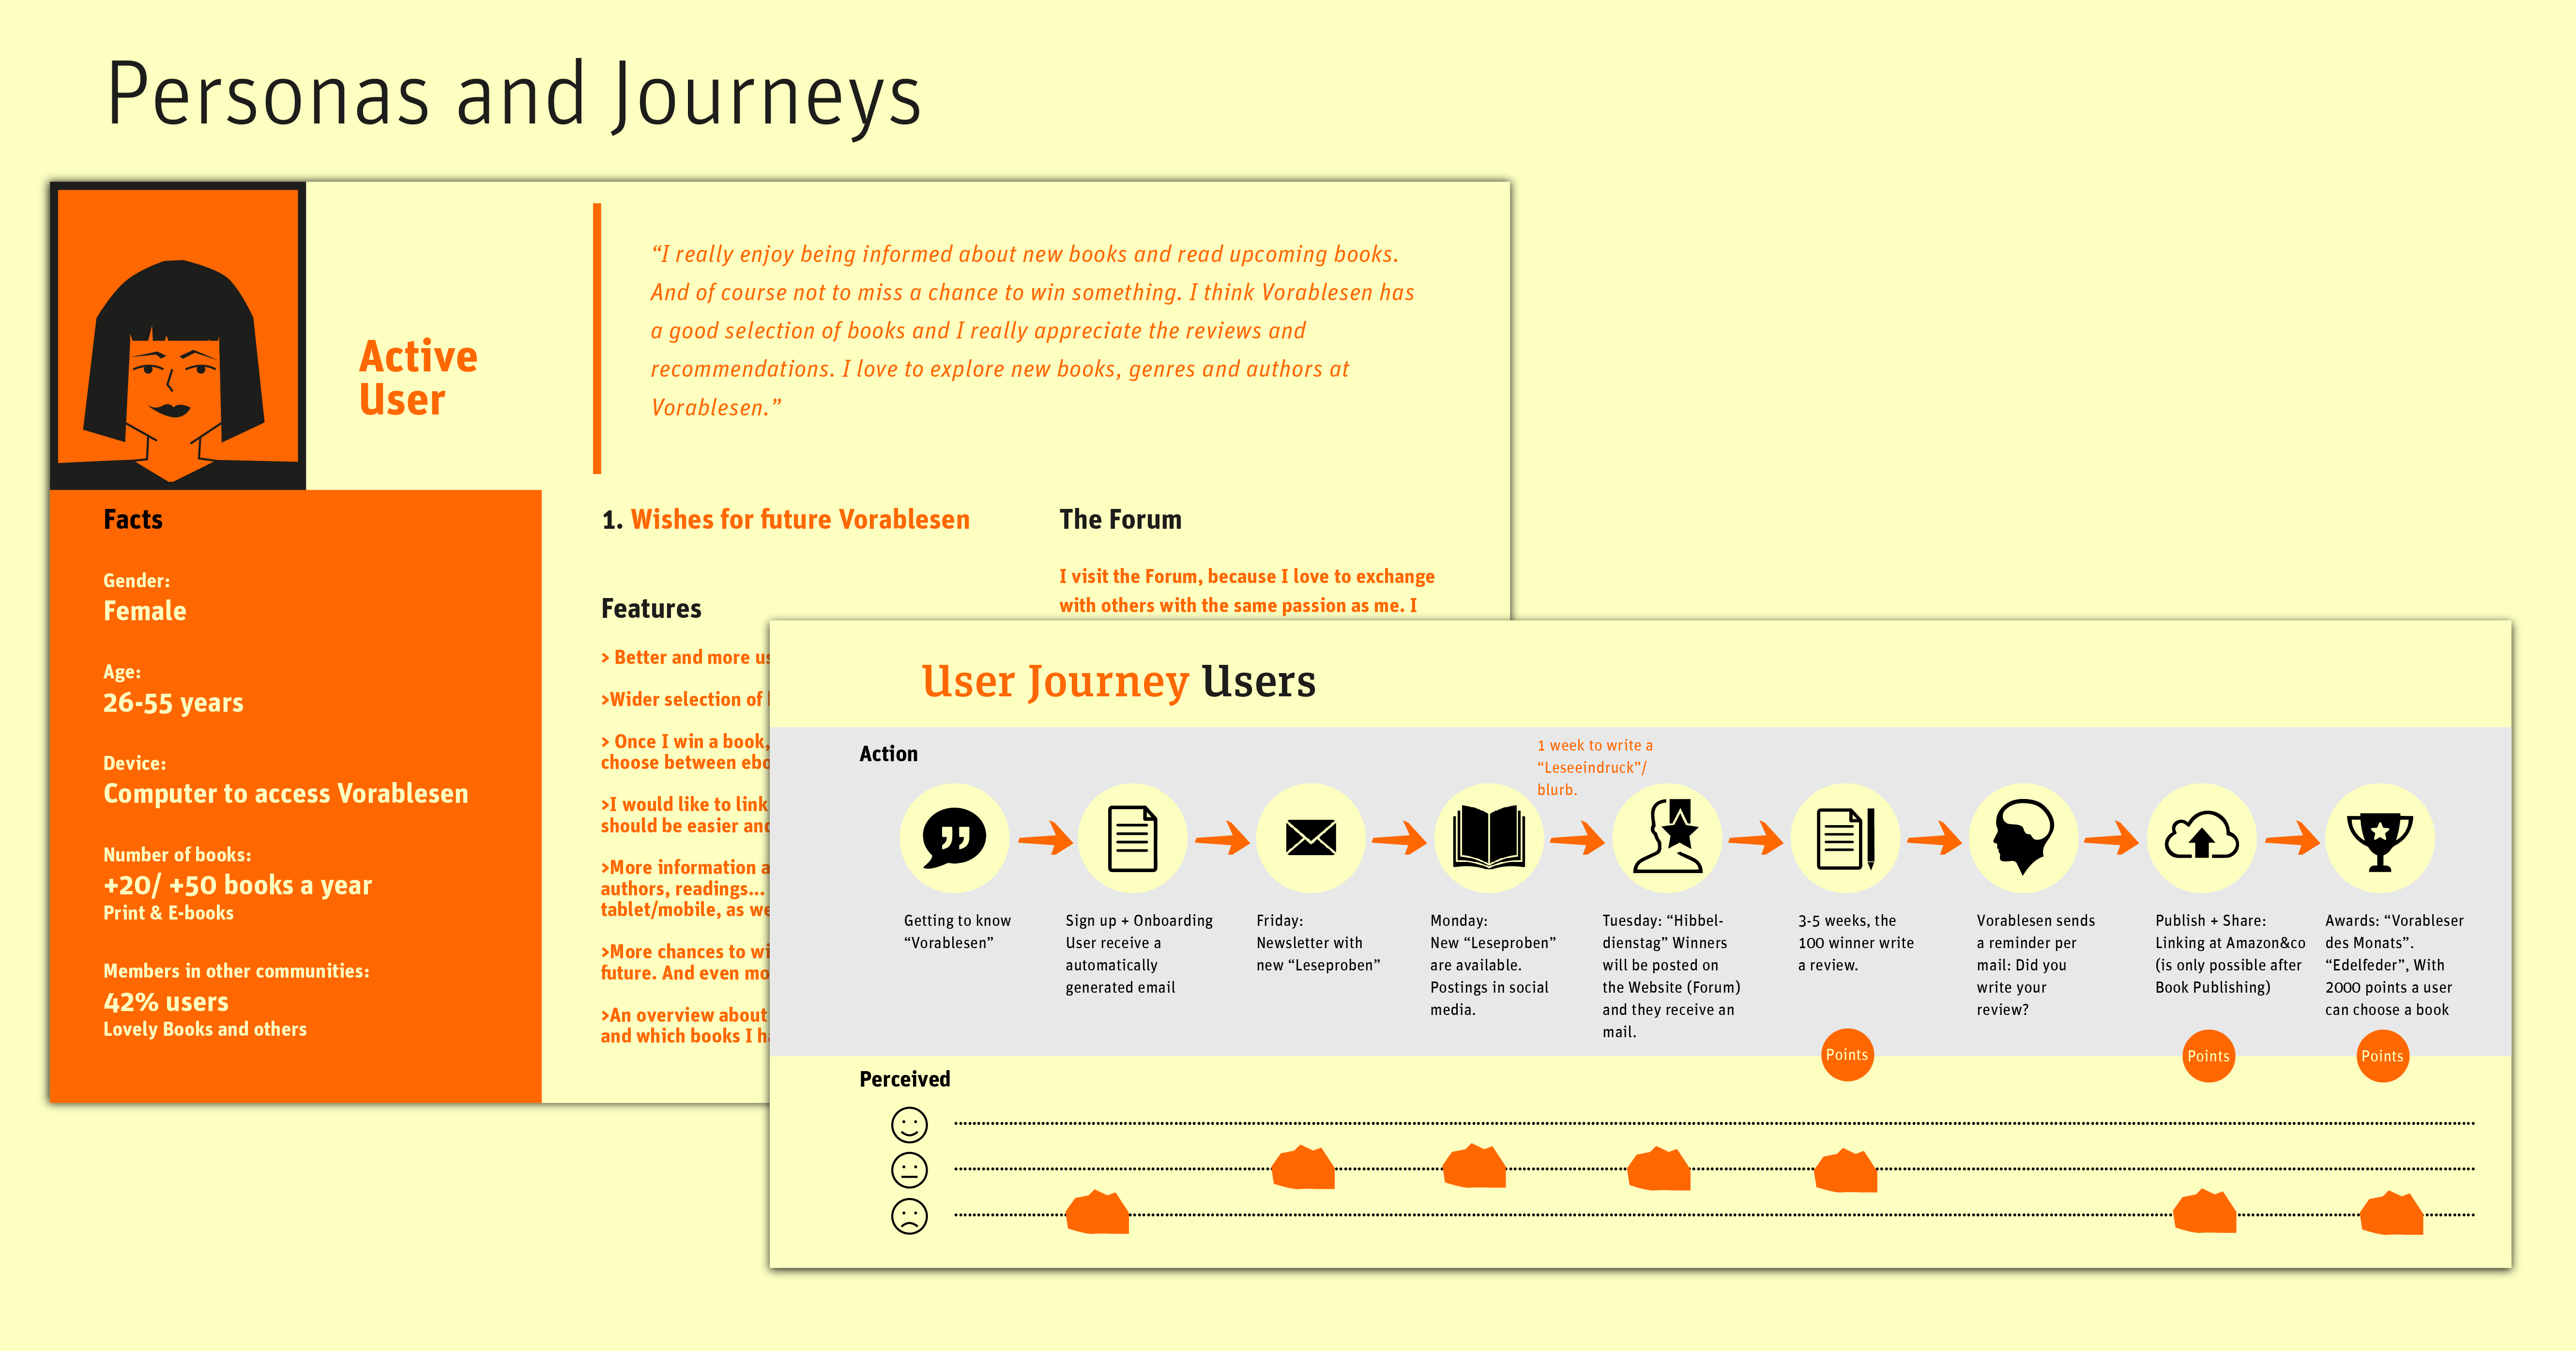 Applied Design Thinking Personas and Journeys